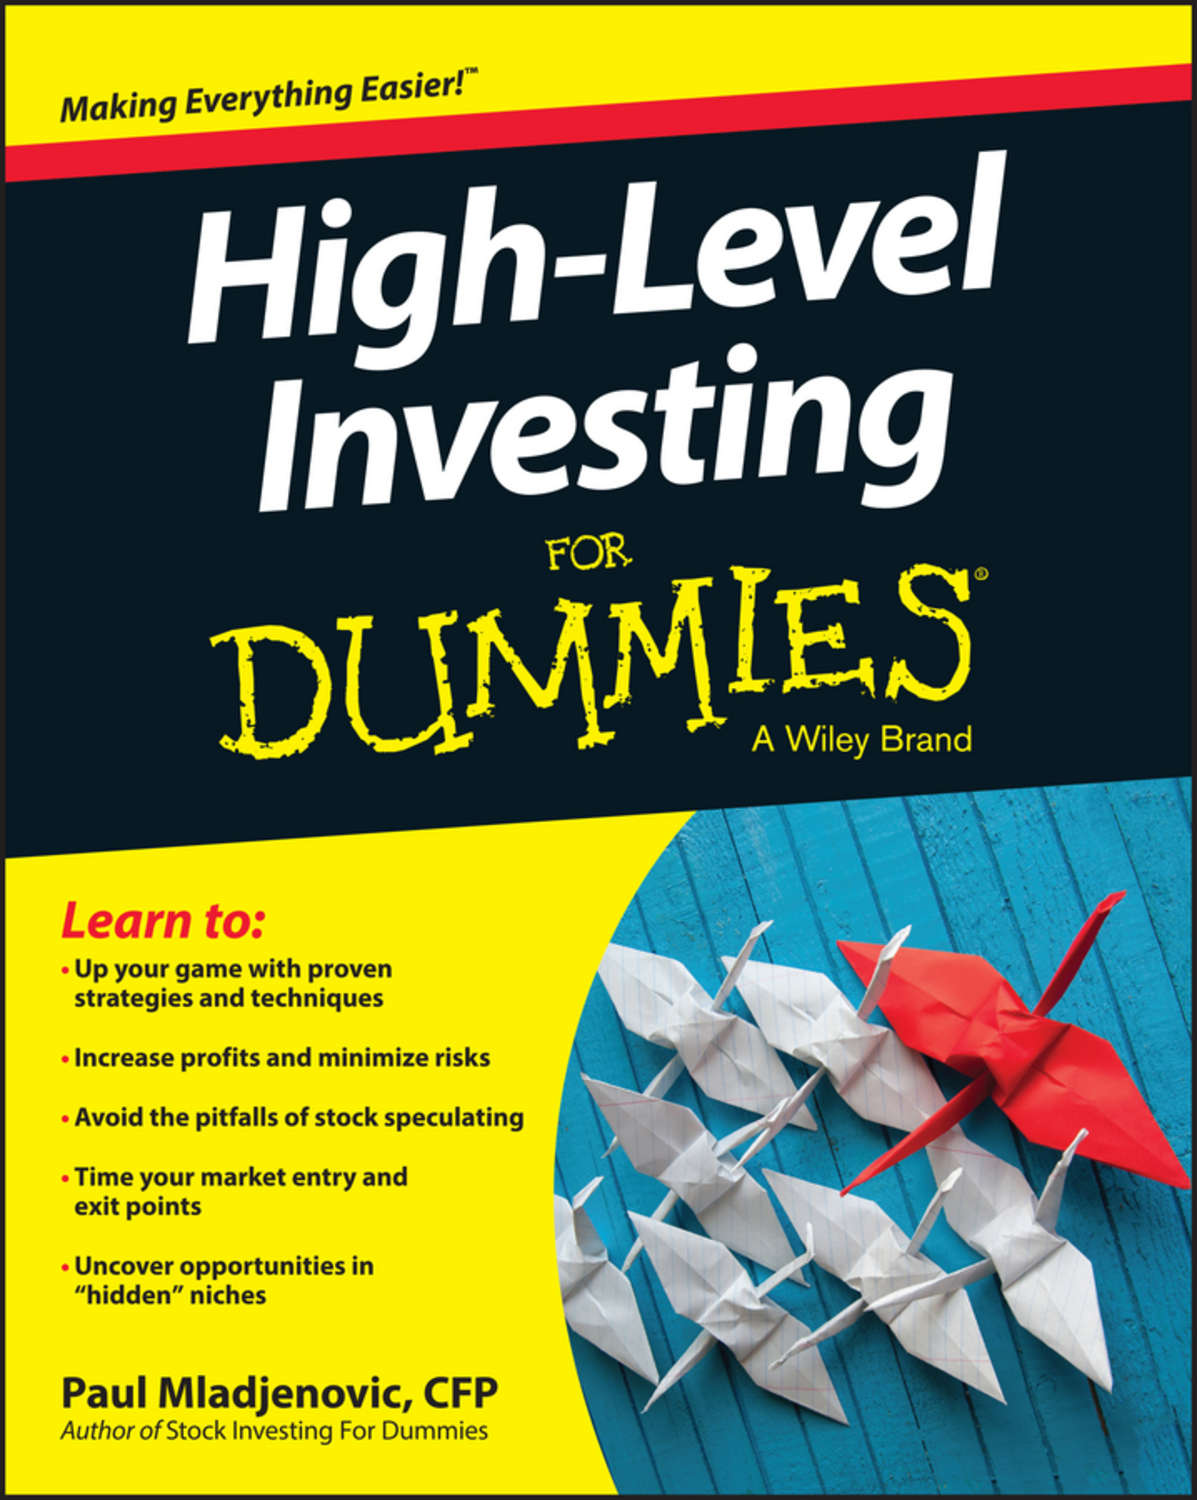 High level investing for dummies working forex analysis